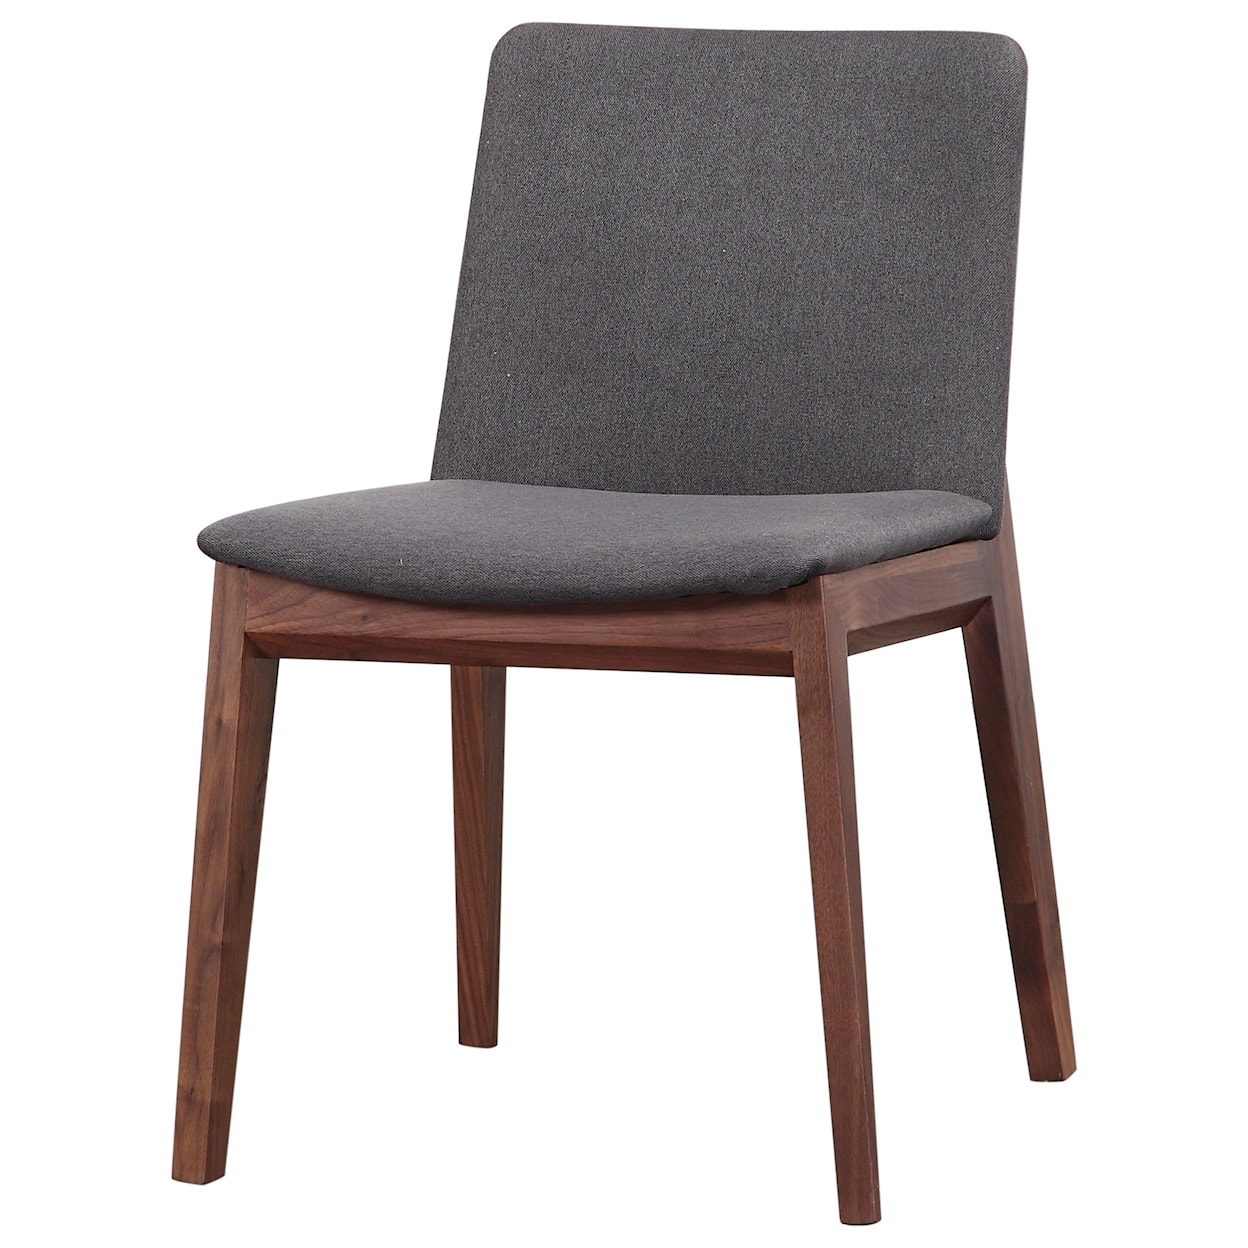 Moe's Home Collection Deco Dining Chair